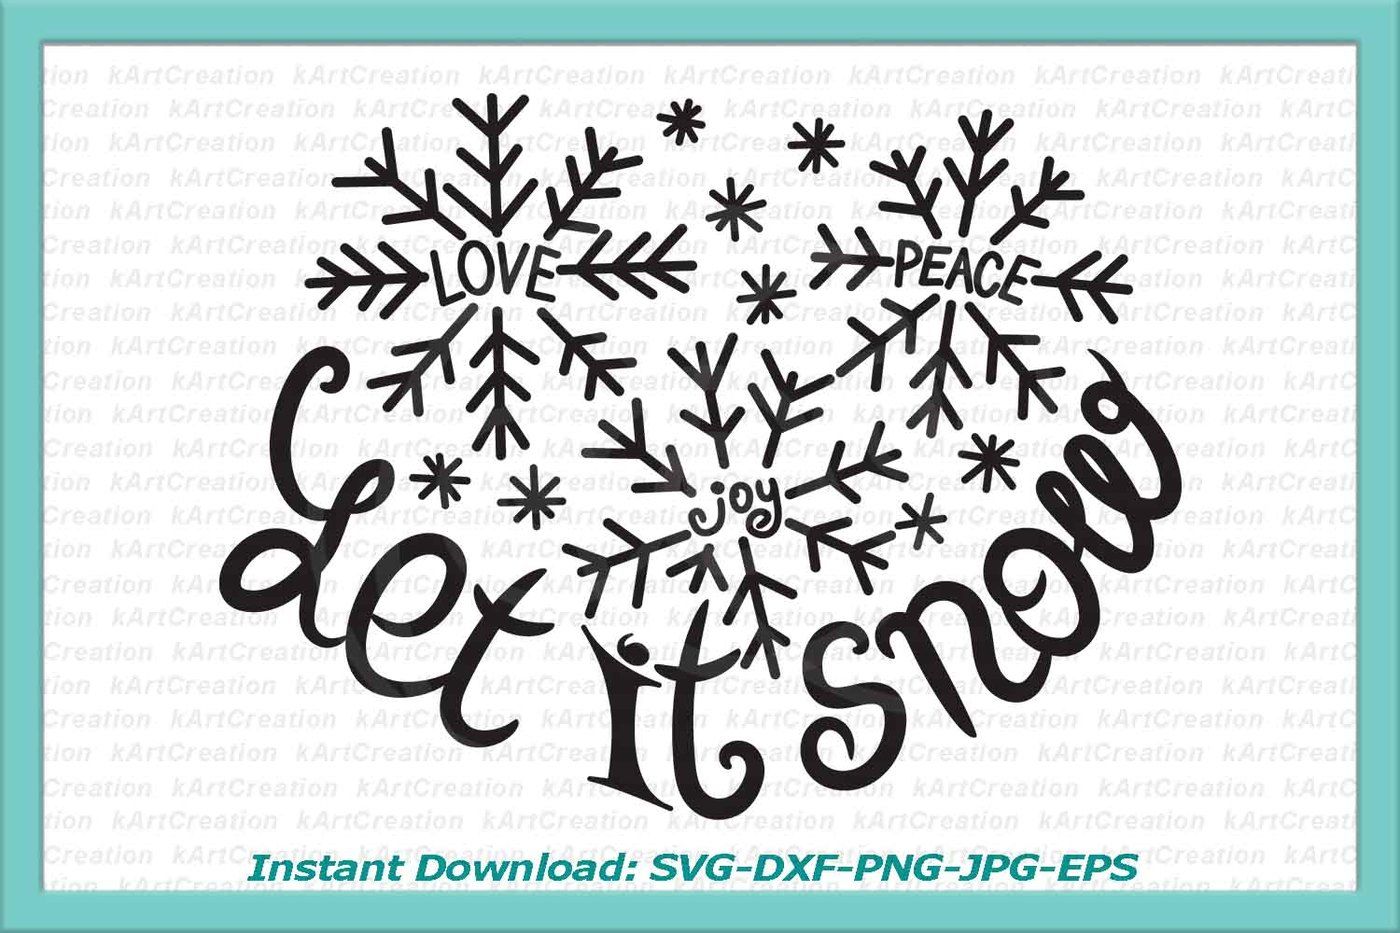 Download Let It Snow Svg Saying File Cutting File Christmas Svg Winter Svg Christmas Words Christmas Wishes Svg Let Is Snow Dxf Love Joy Peace By Kartcreation Thehungryjpeg Com